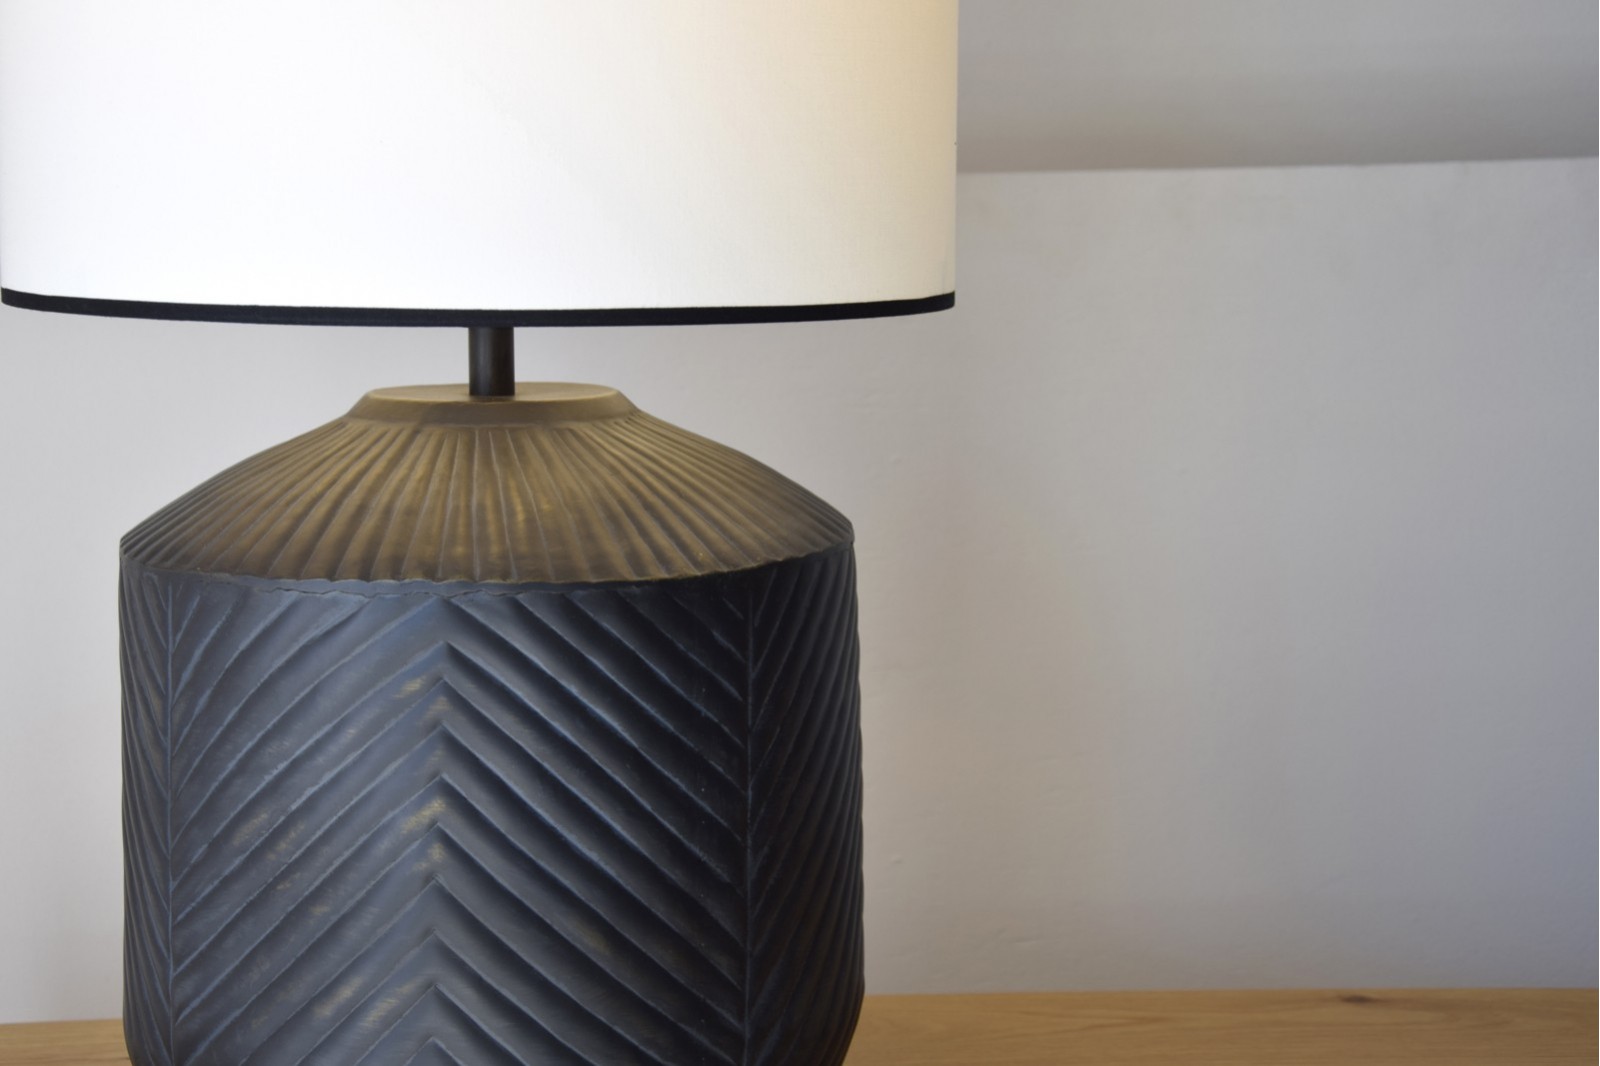 METAL TABLE LAMP N2 WITH SHADE